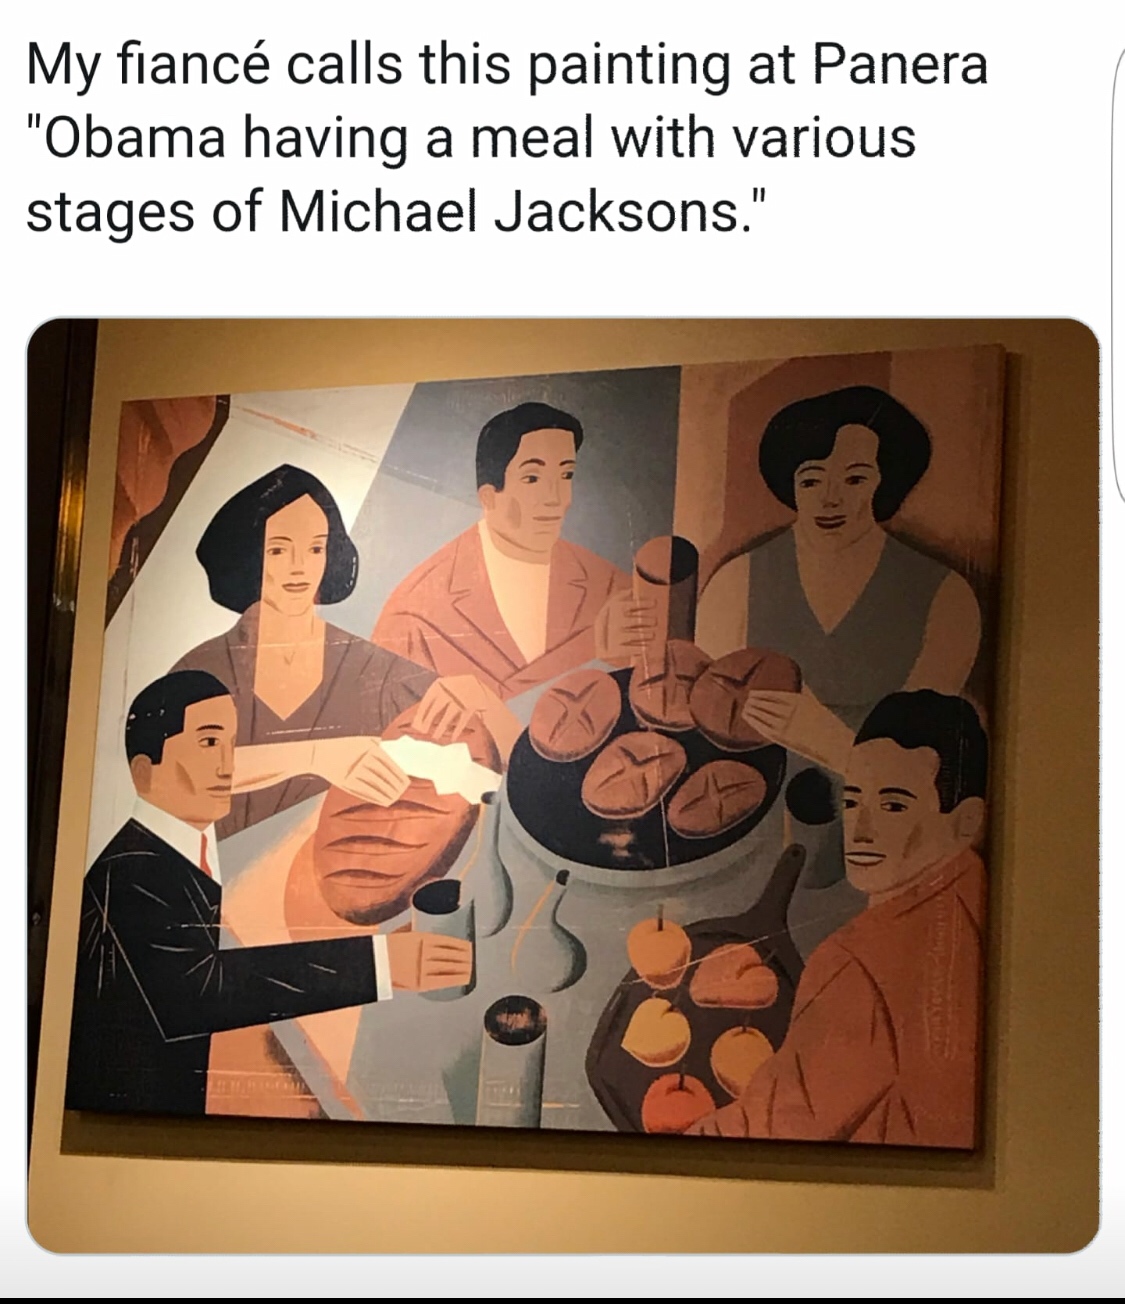 painting memes - My fianc calls this painting at Panera "Obama having a meal with various stages of Michael Jacksons."